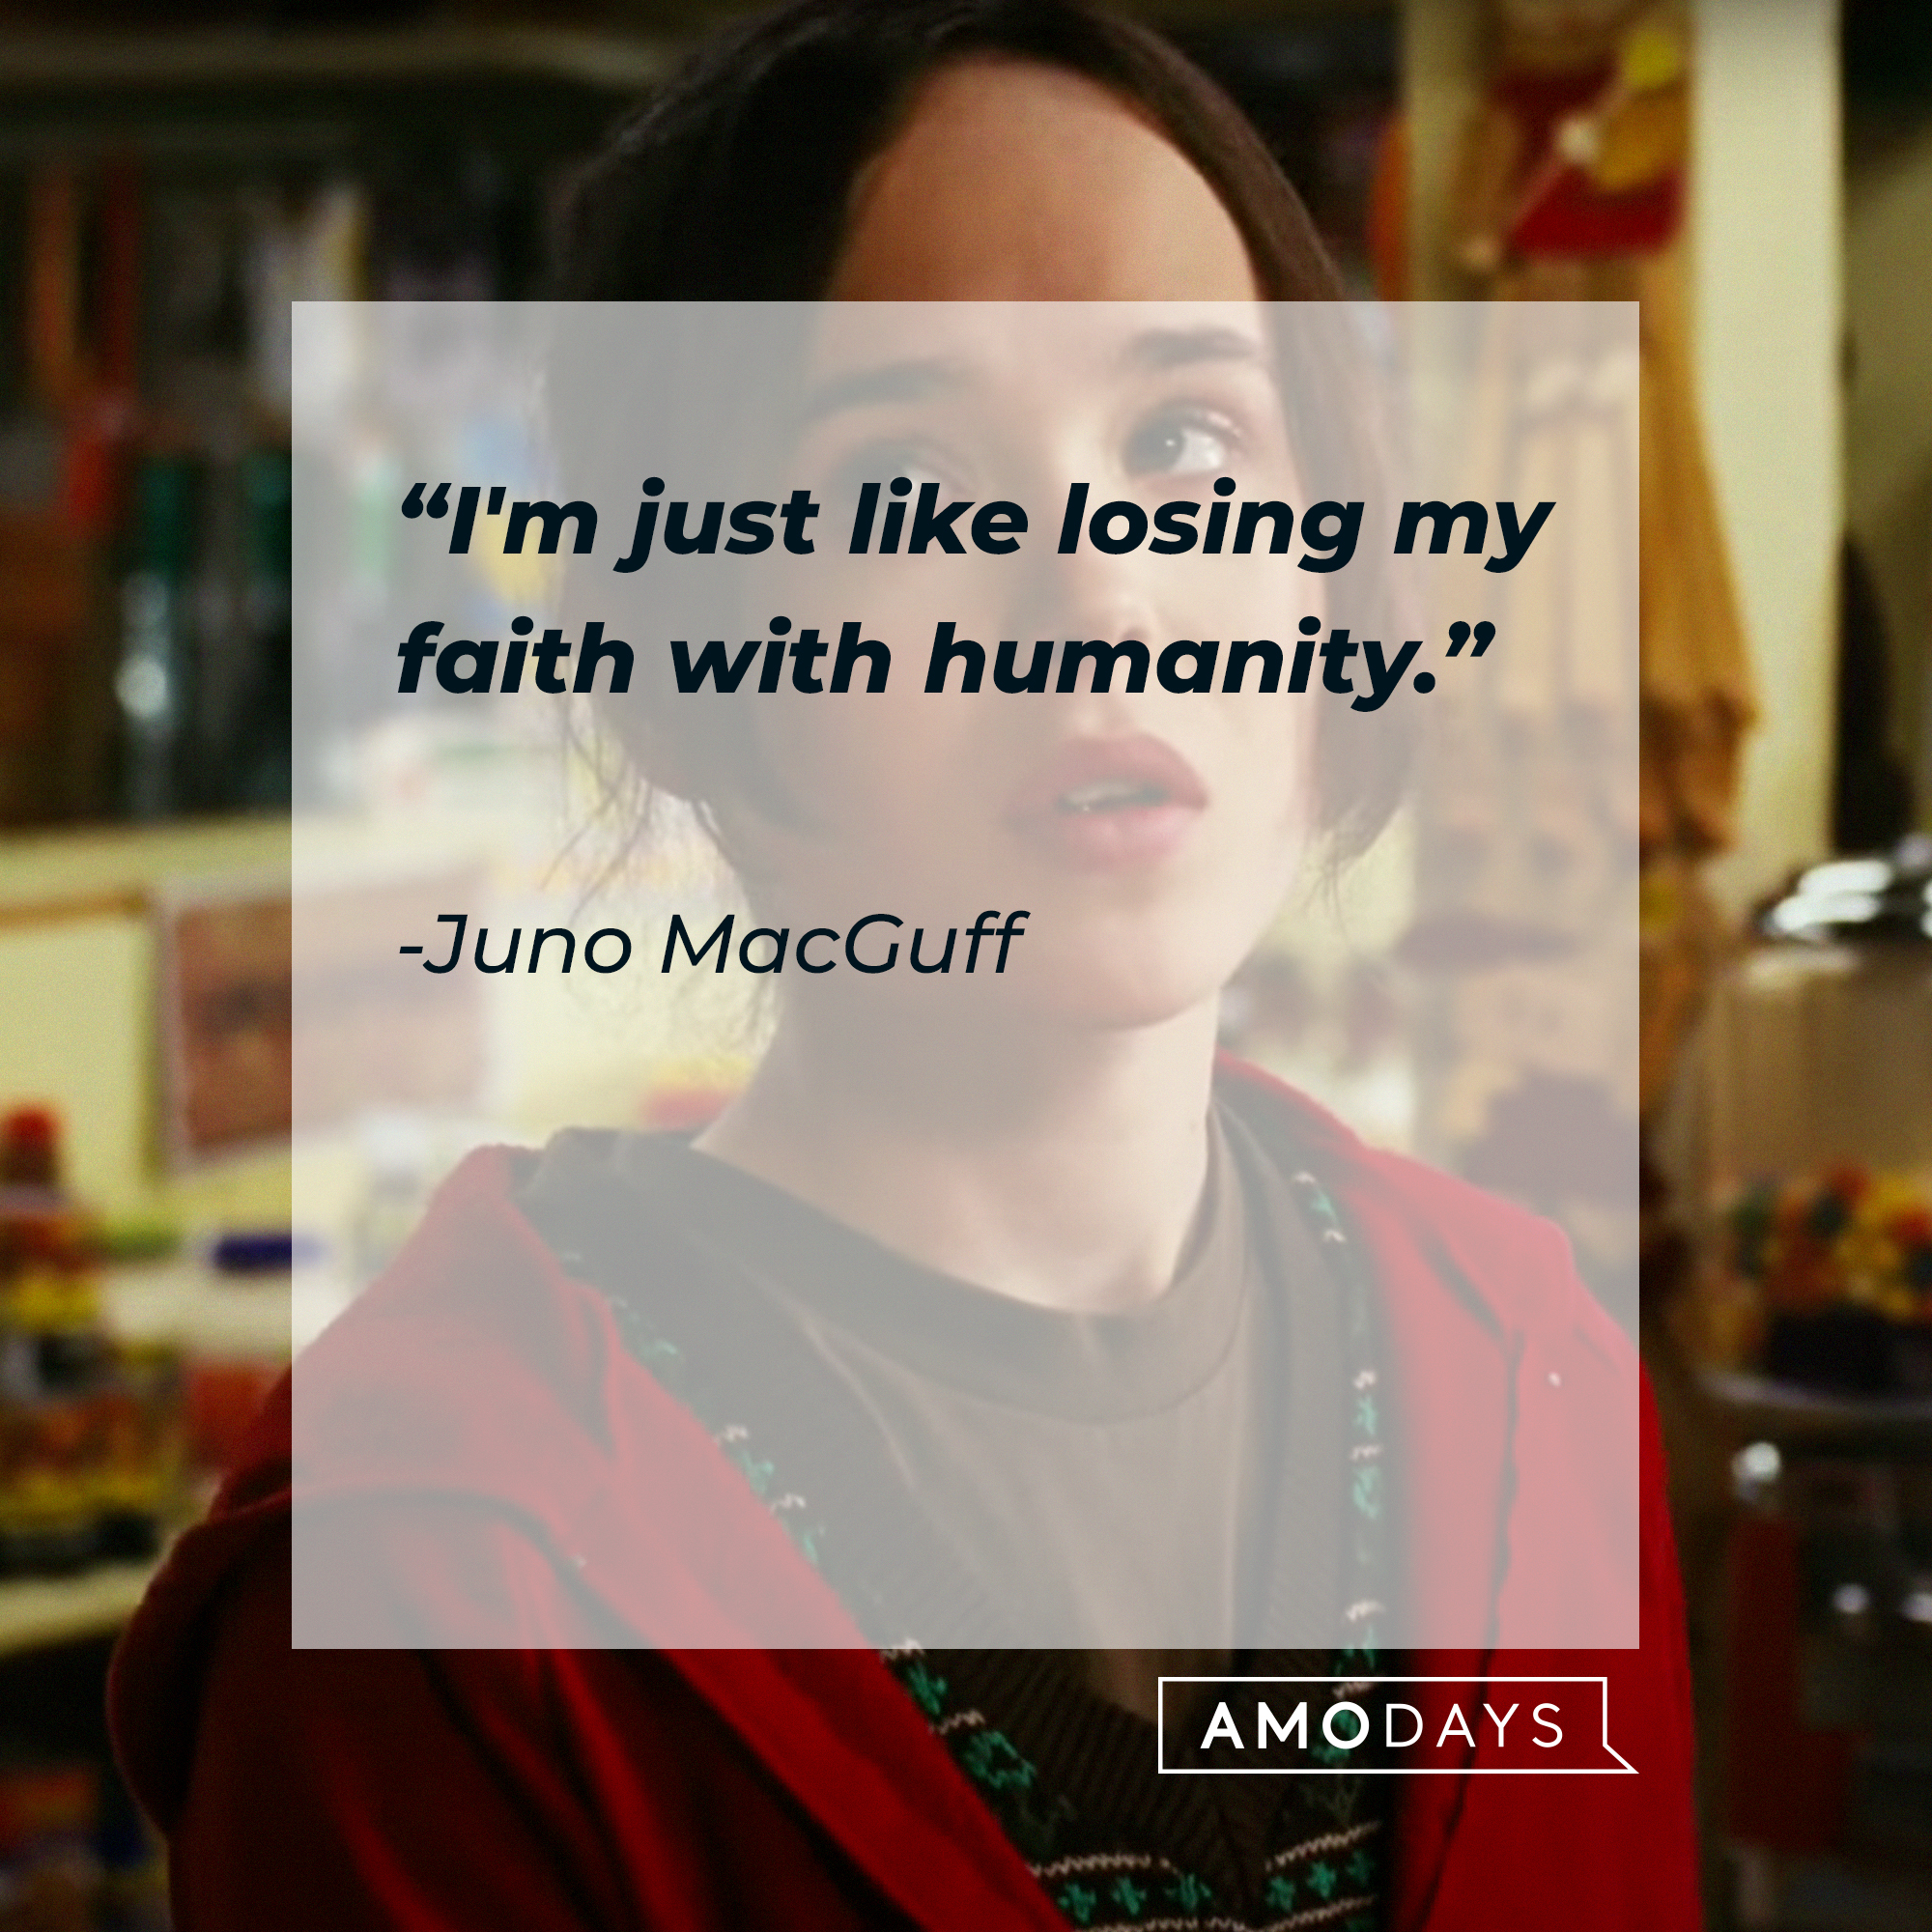 Juno MacGuff, with her quote: “I'm just like losing my faith with humanity.” | Source: Facebook.com/JunoTheMovie